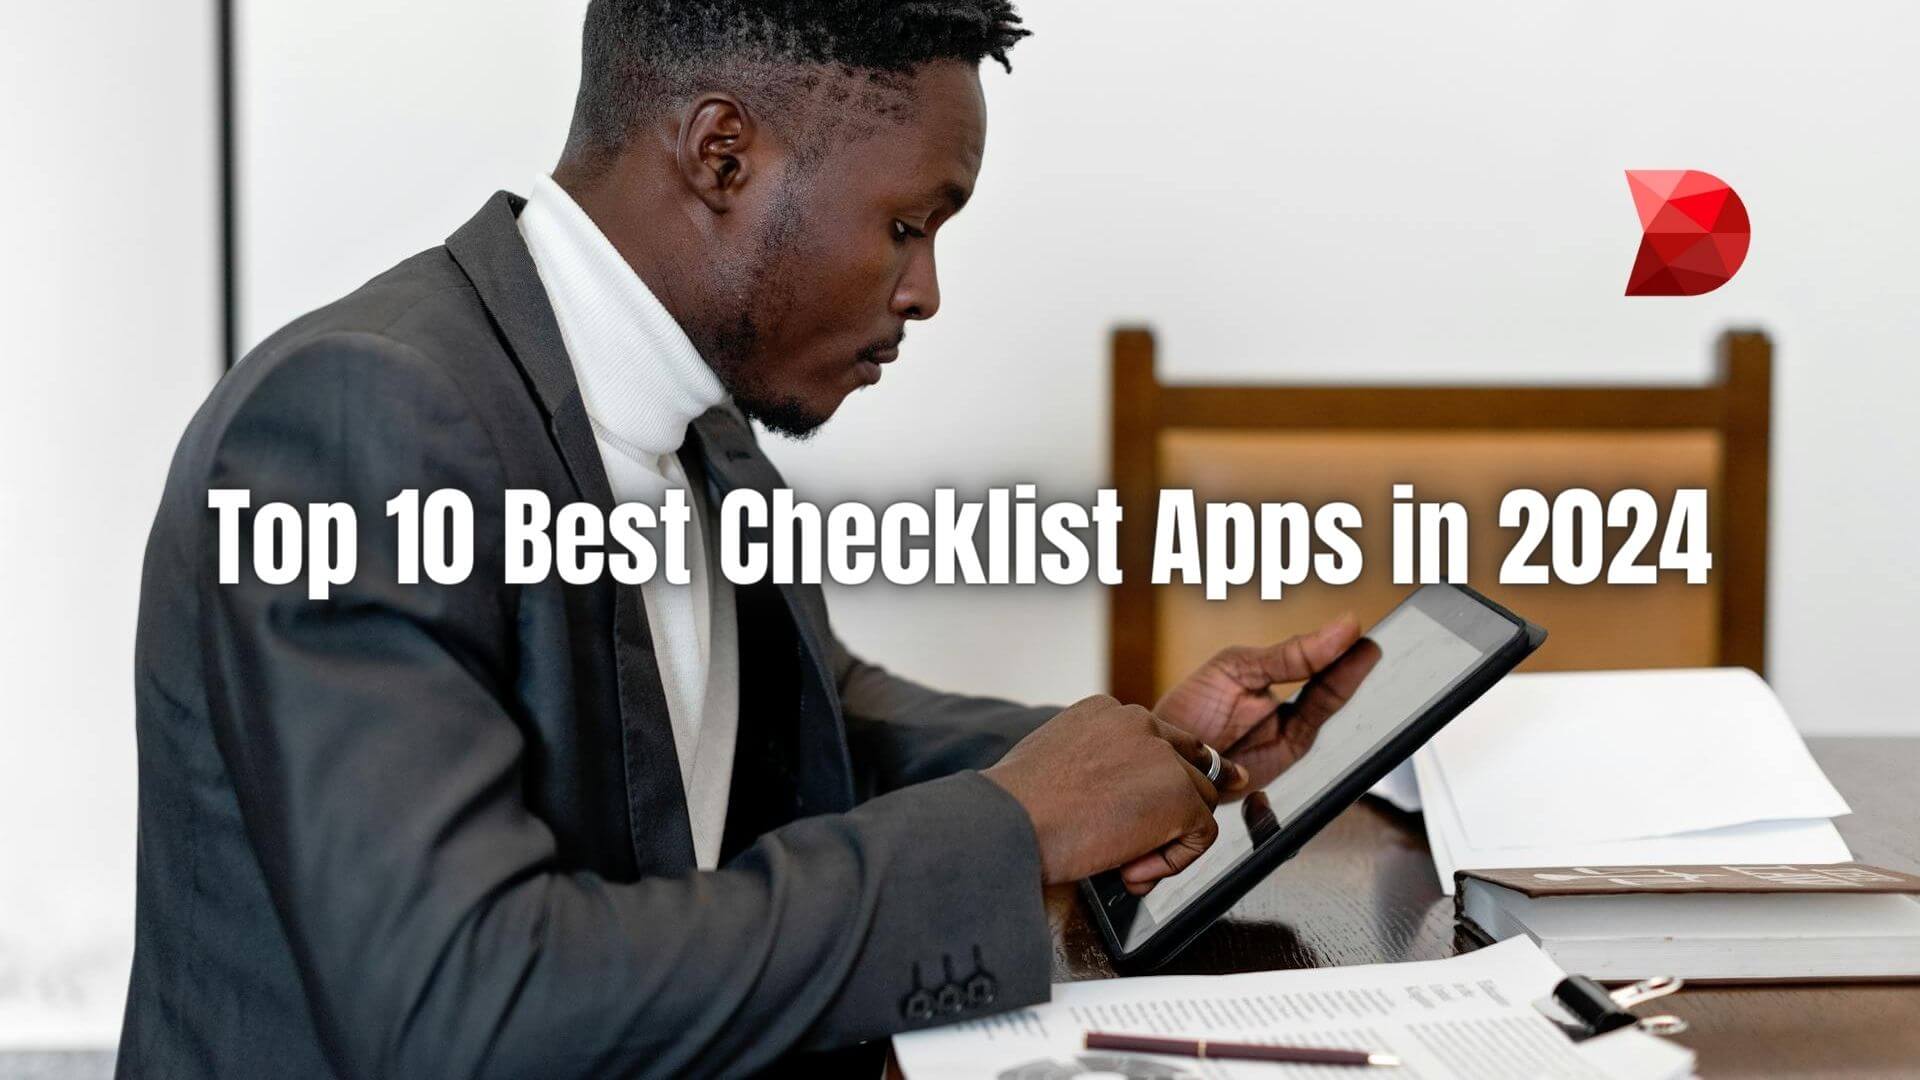 Elevate your productivity game in 2024 with our top 10 checklist apps! Discover the tools that will revolutionize your task management.